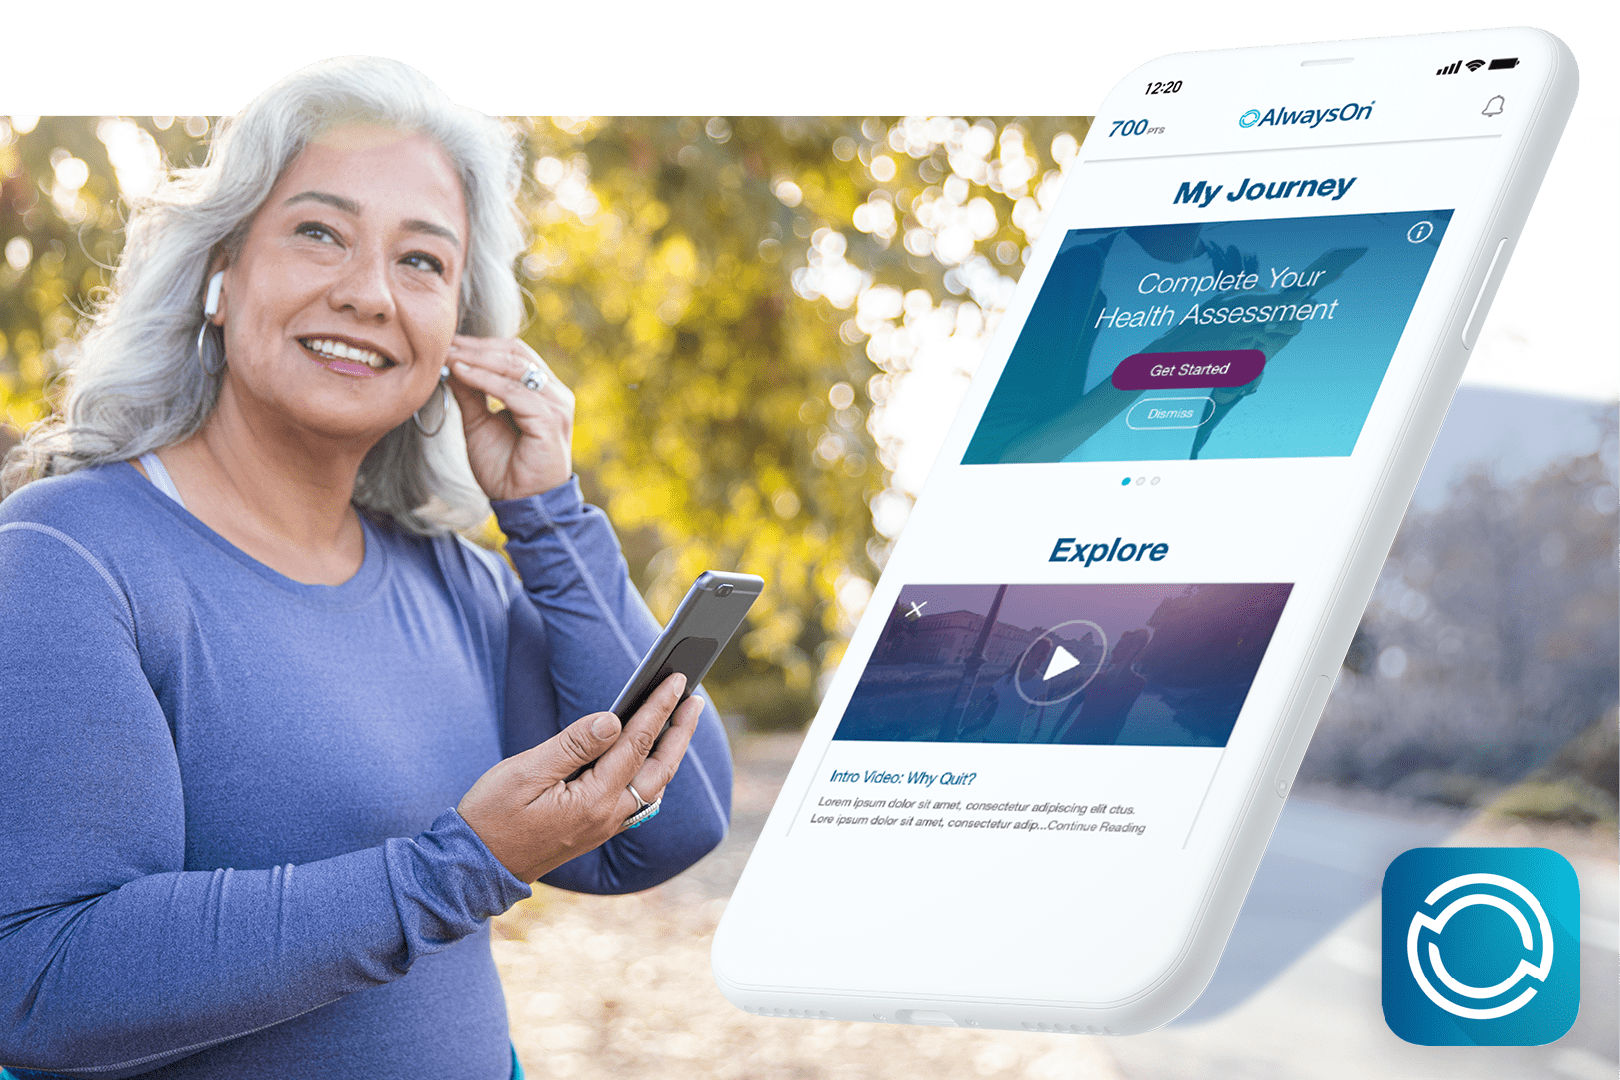 Woman tracking her exercise using the AlwaysOn app on her phone